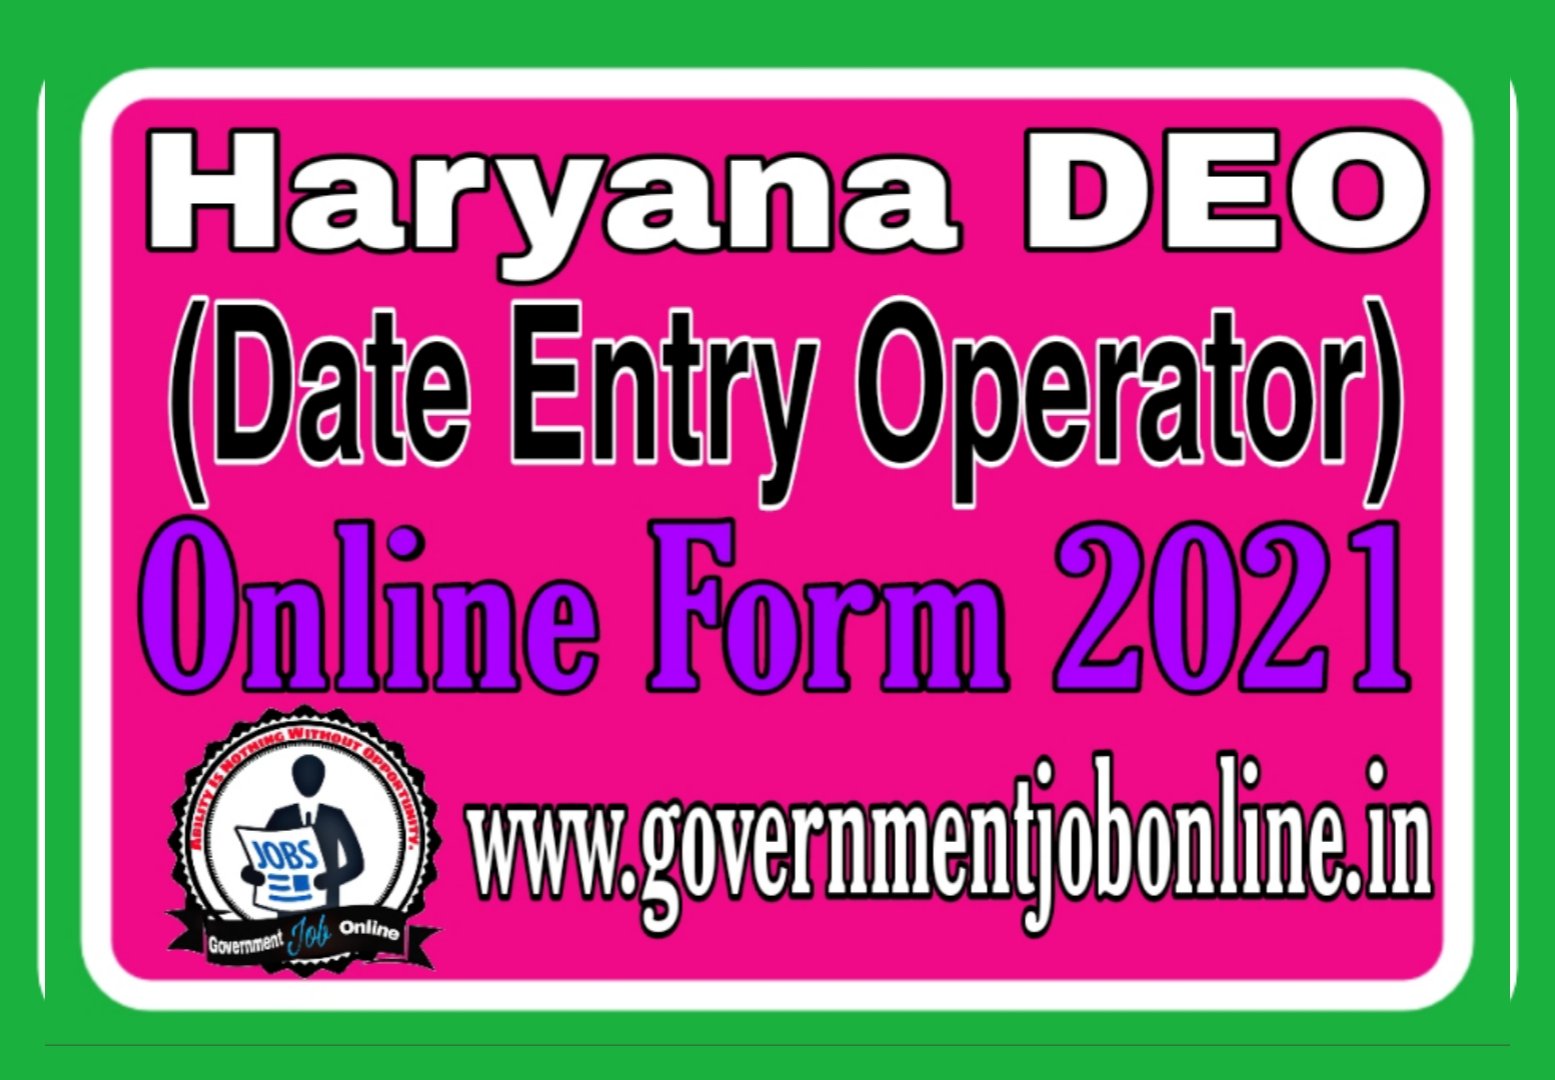 Haryana Data Entry Operator DEO Online Form 2021